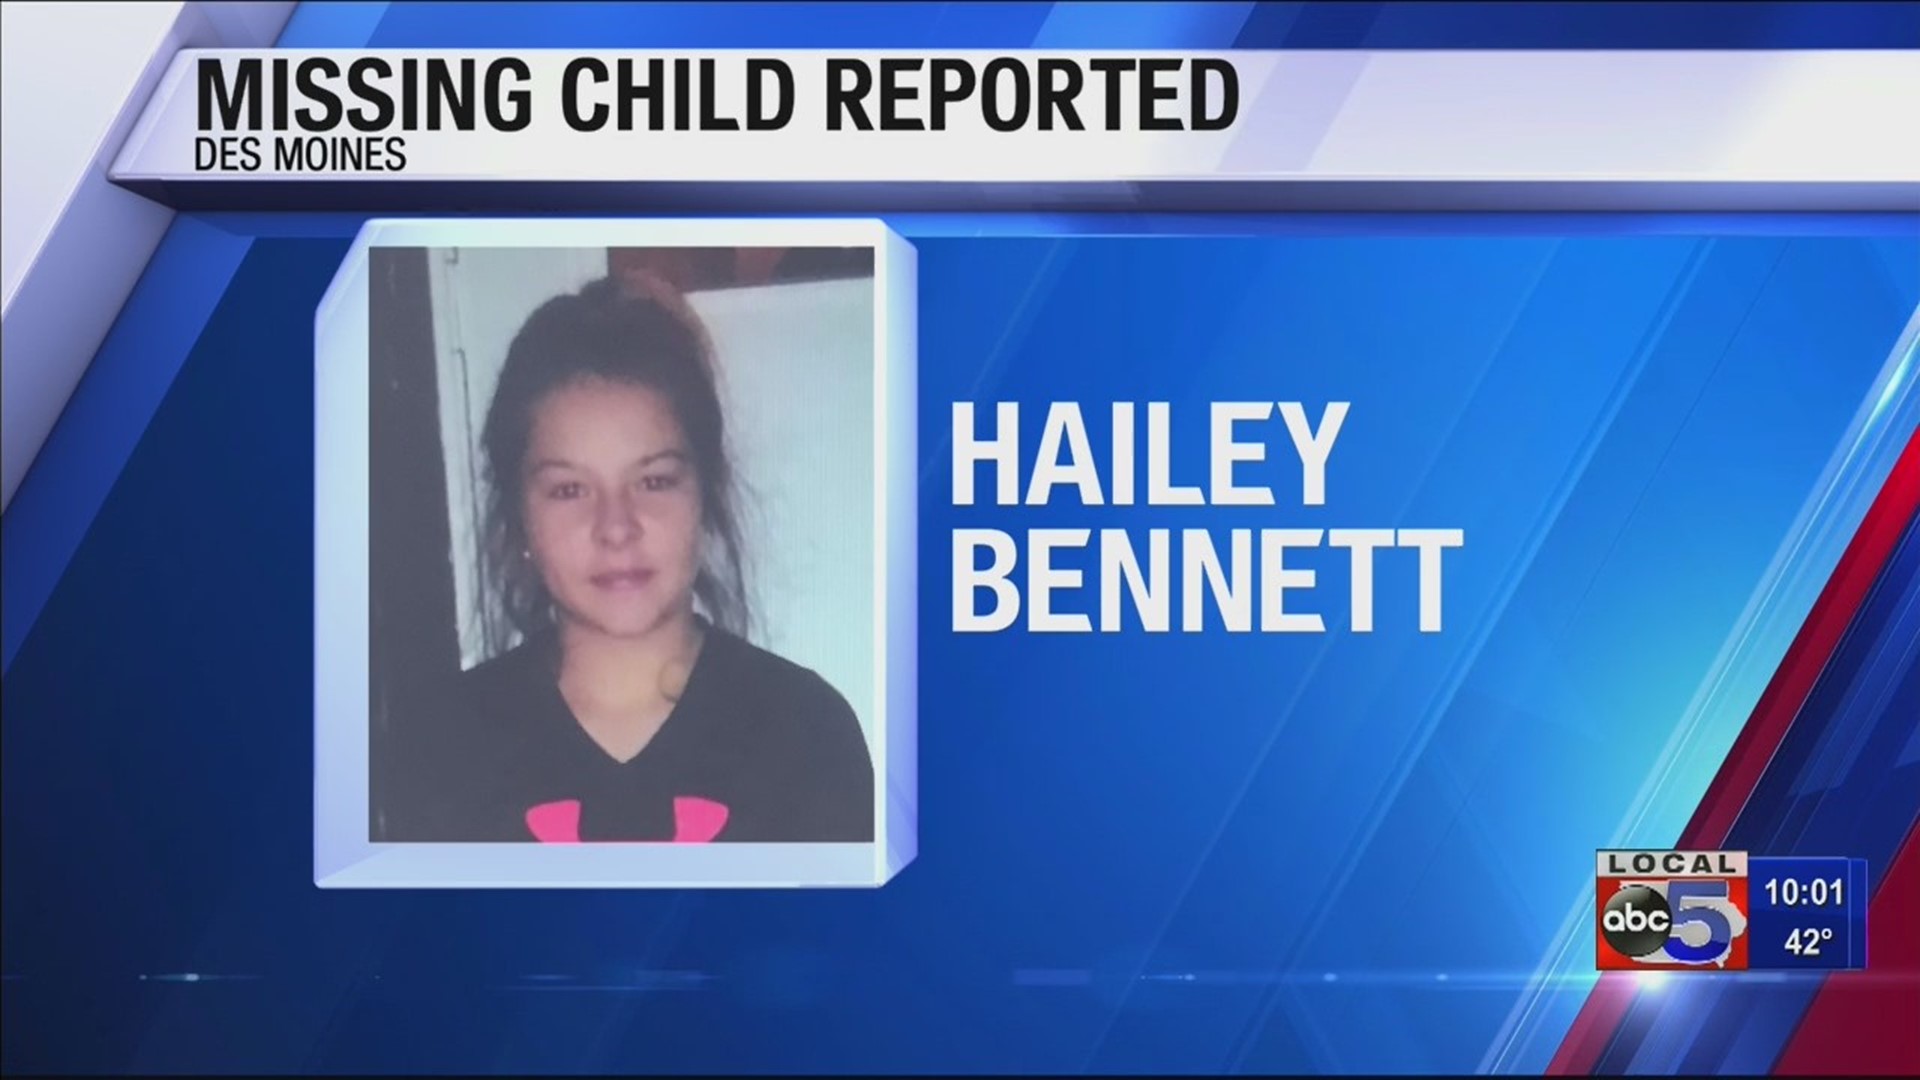 12-year-old Hailey Bennett was last seen at approximately 5:00 p.m. when she left her home in the 1400 block of Hull Avenue.